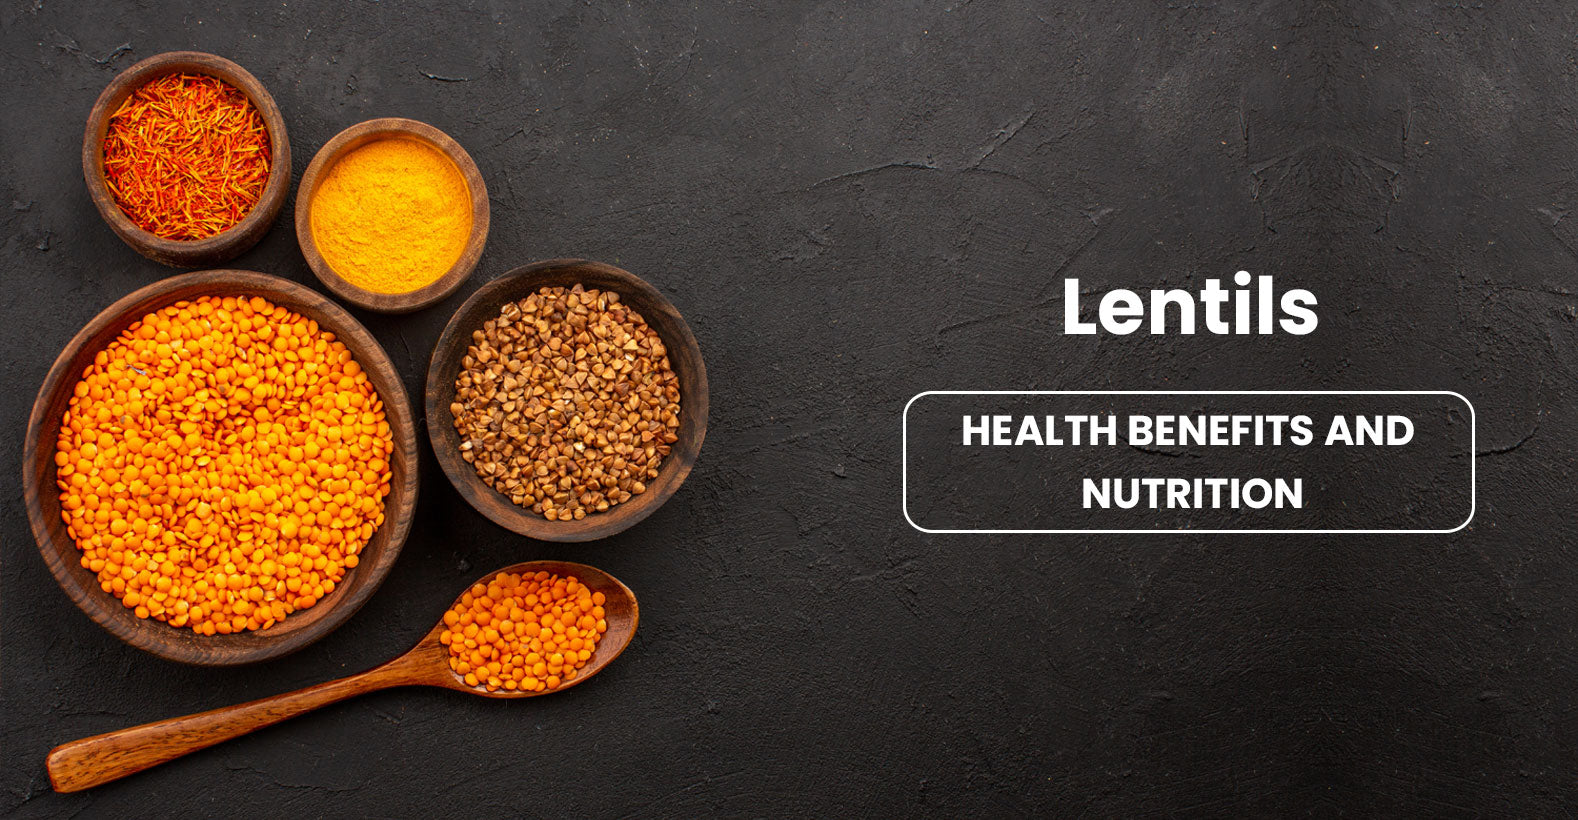 Lentils: Health Benefits, Nutritional Facts, Types of Legumes and Recipes